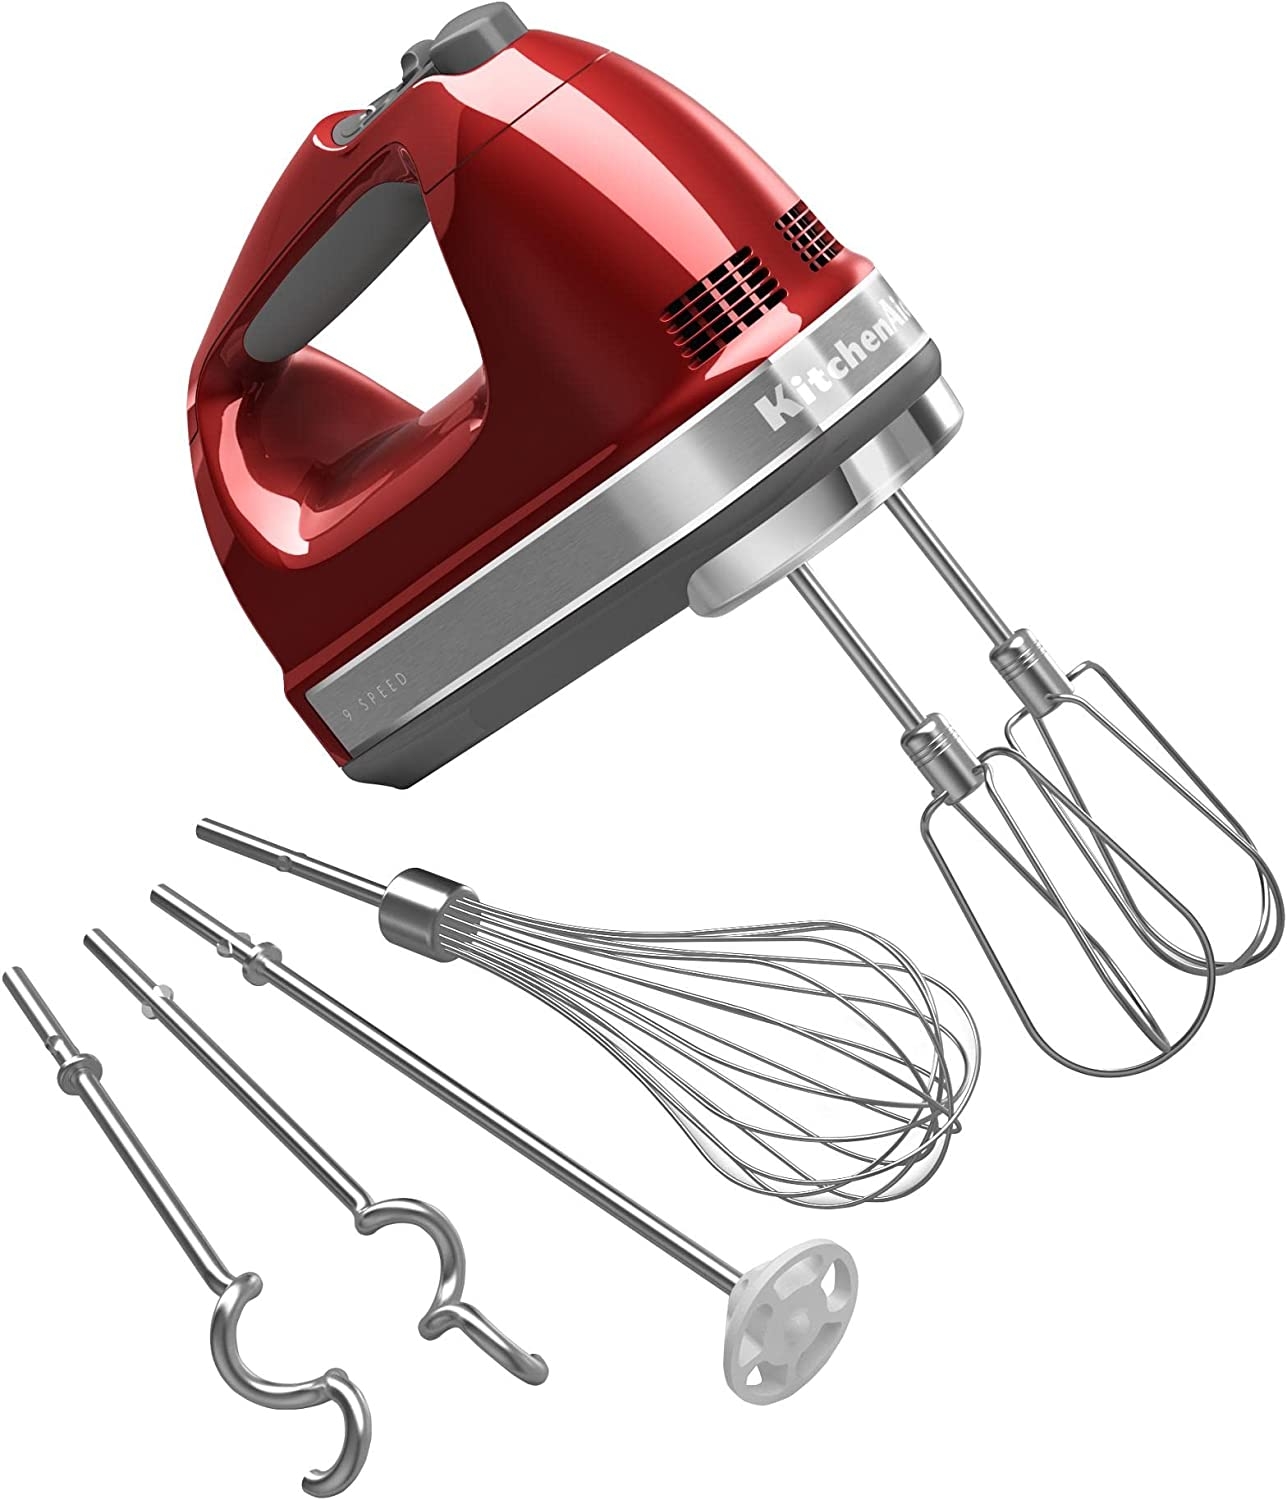 KitchenAid 9-Speed Digital Hand Mixer with Turbo Beater II Accessories and Pro Whisk – Contour Silver Import To Shop ×Product